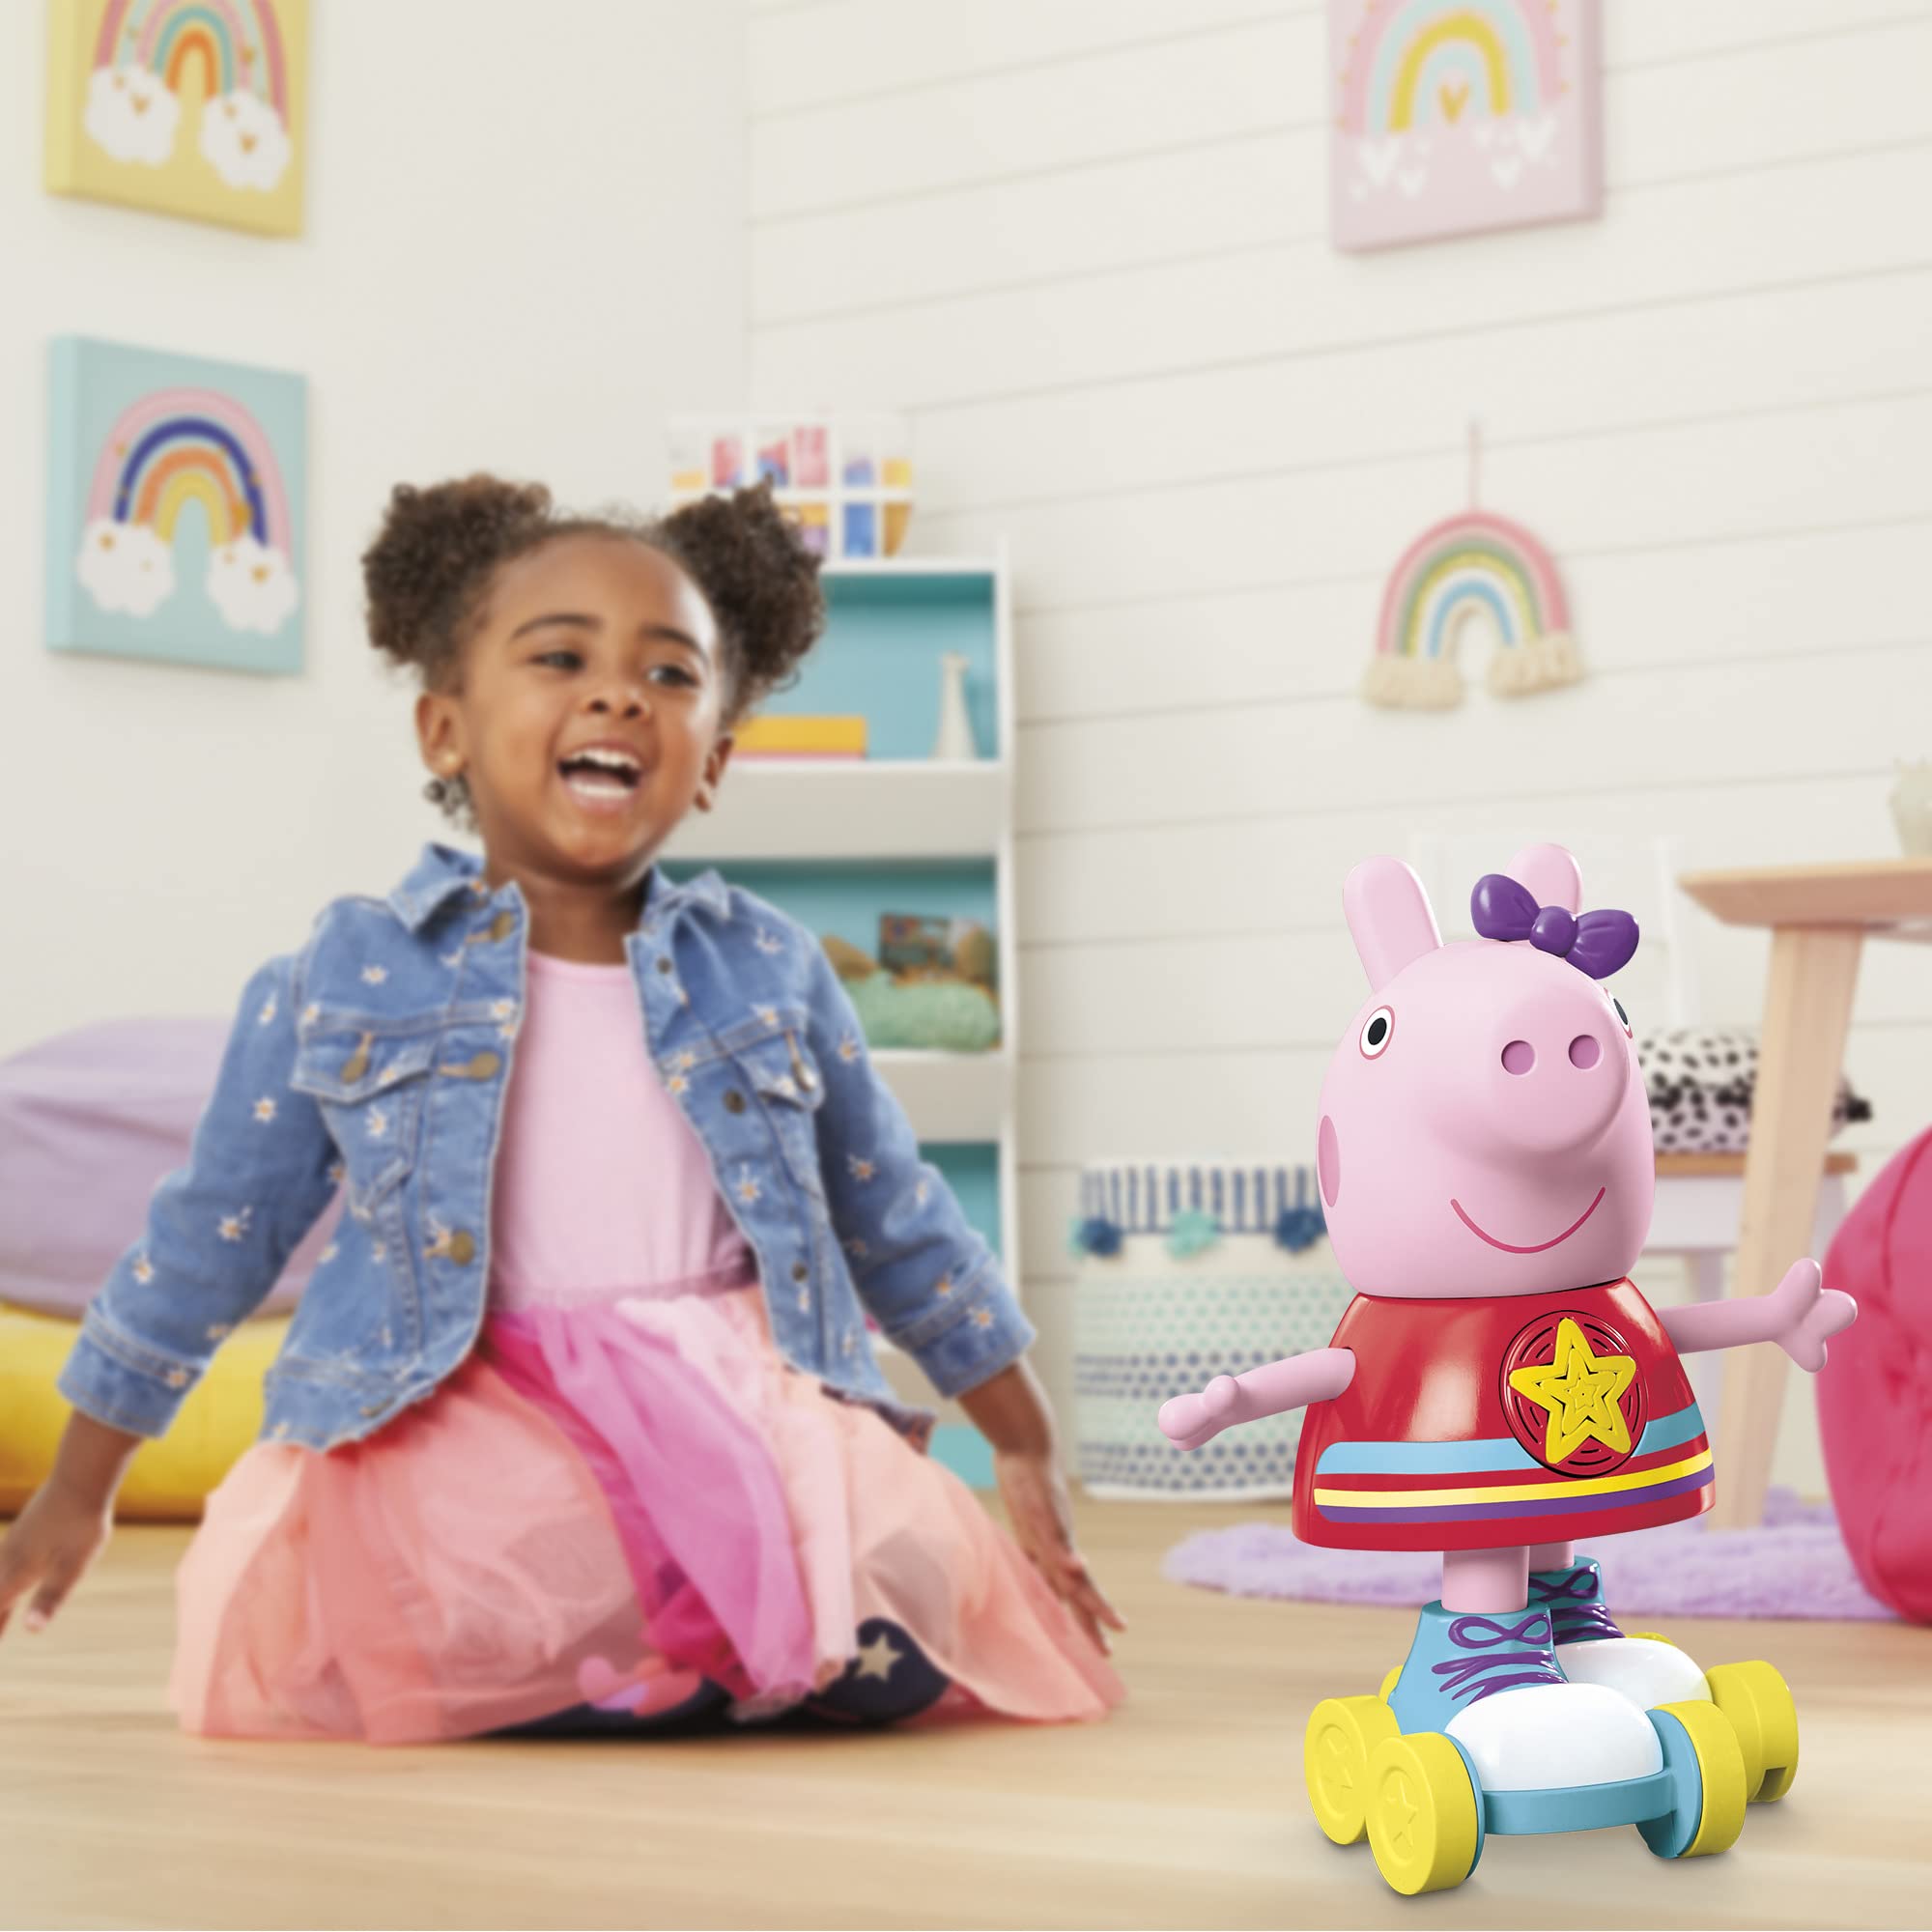 Peppa Pig Disco Peppa Roller Skating Doll, Pull-and-Go Action, 11 Inch Figures, Preschool Toys for 3 Year Old Girls and Boys and Up, with Lights, Speech, and Music